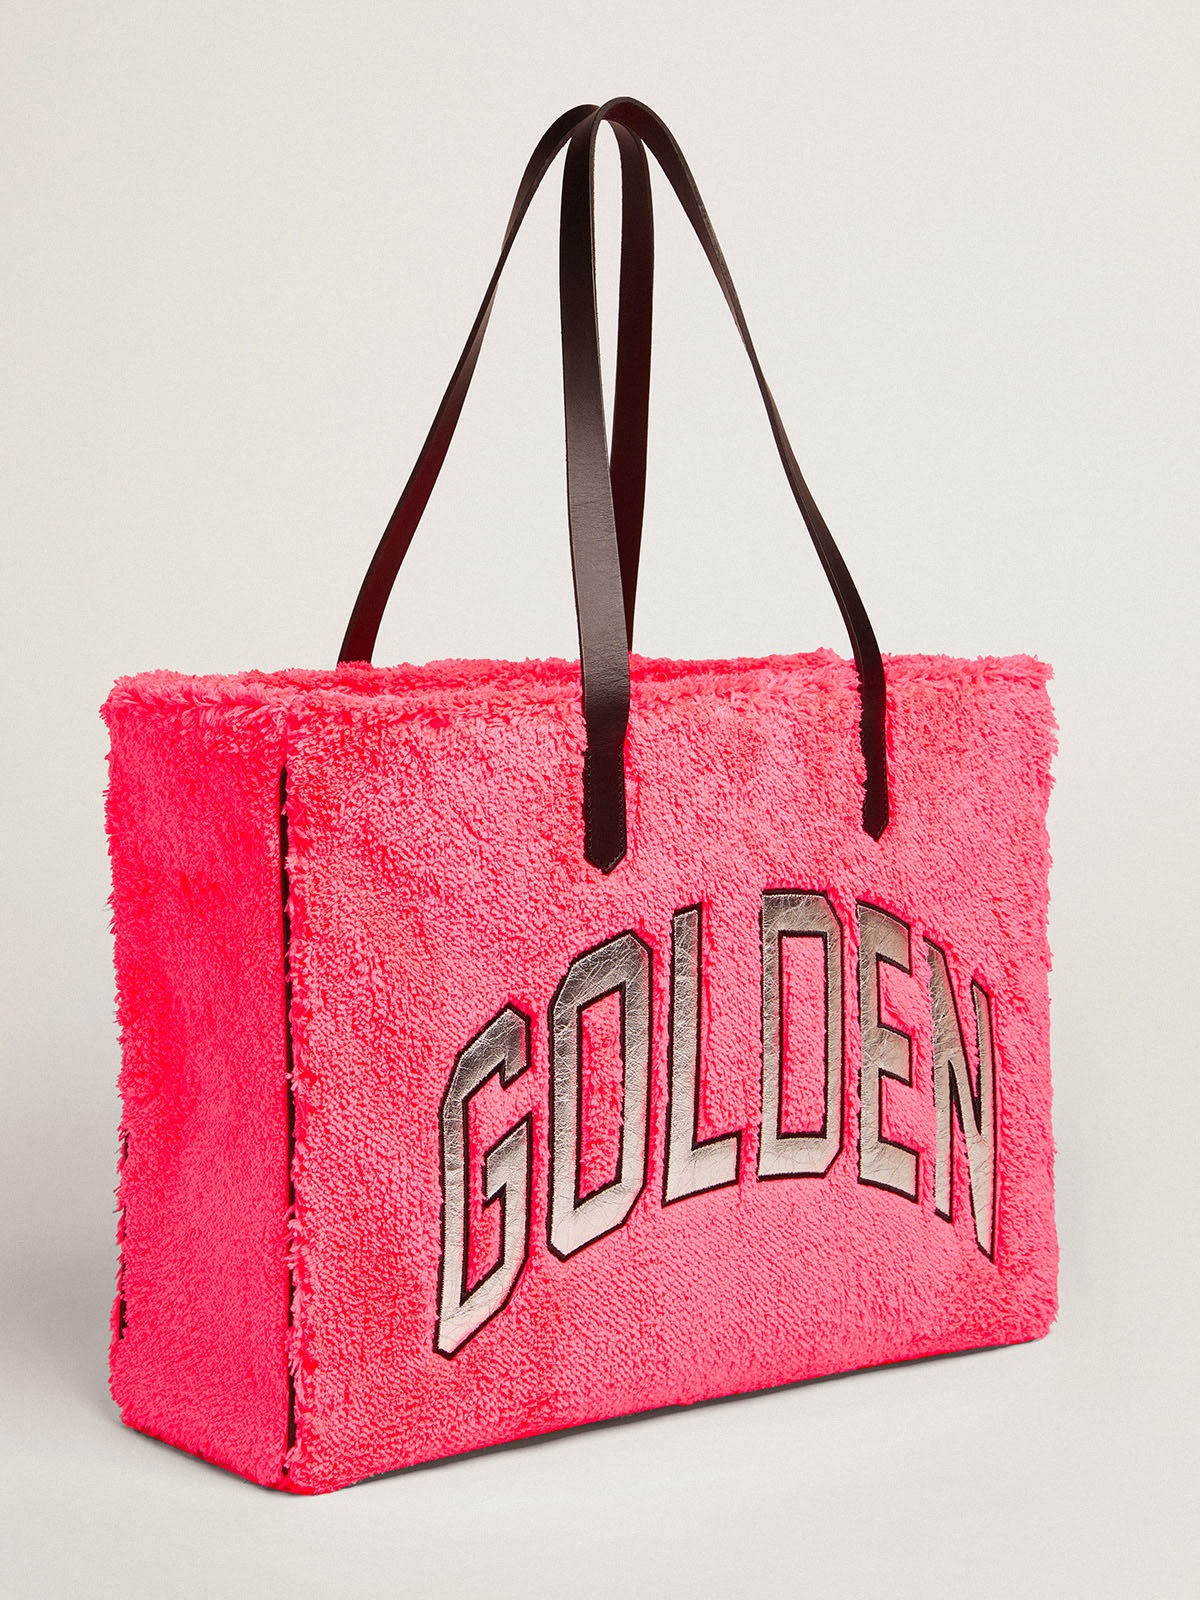 East-West California Bag in fuchsia terry fabric with Golden lettering in silver metallic leather - 5